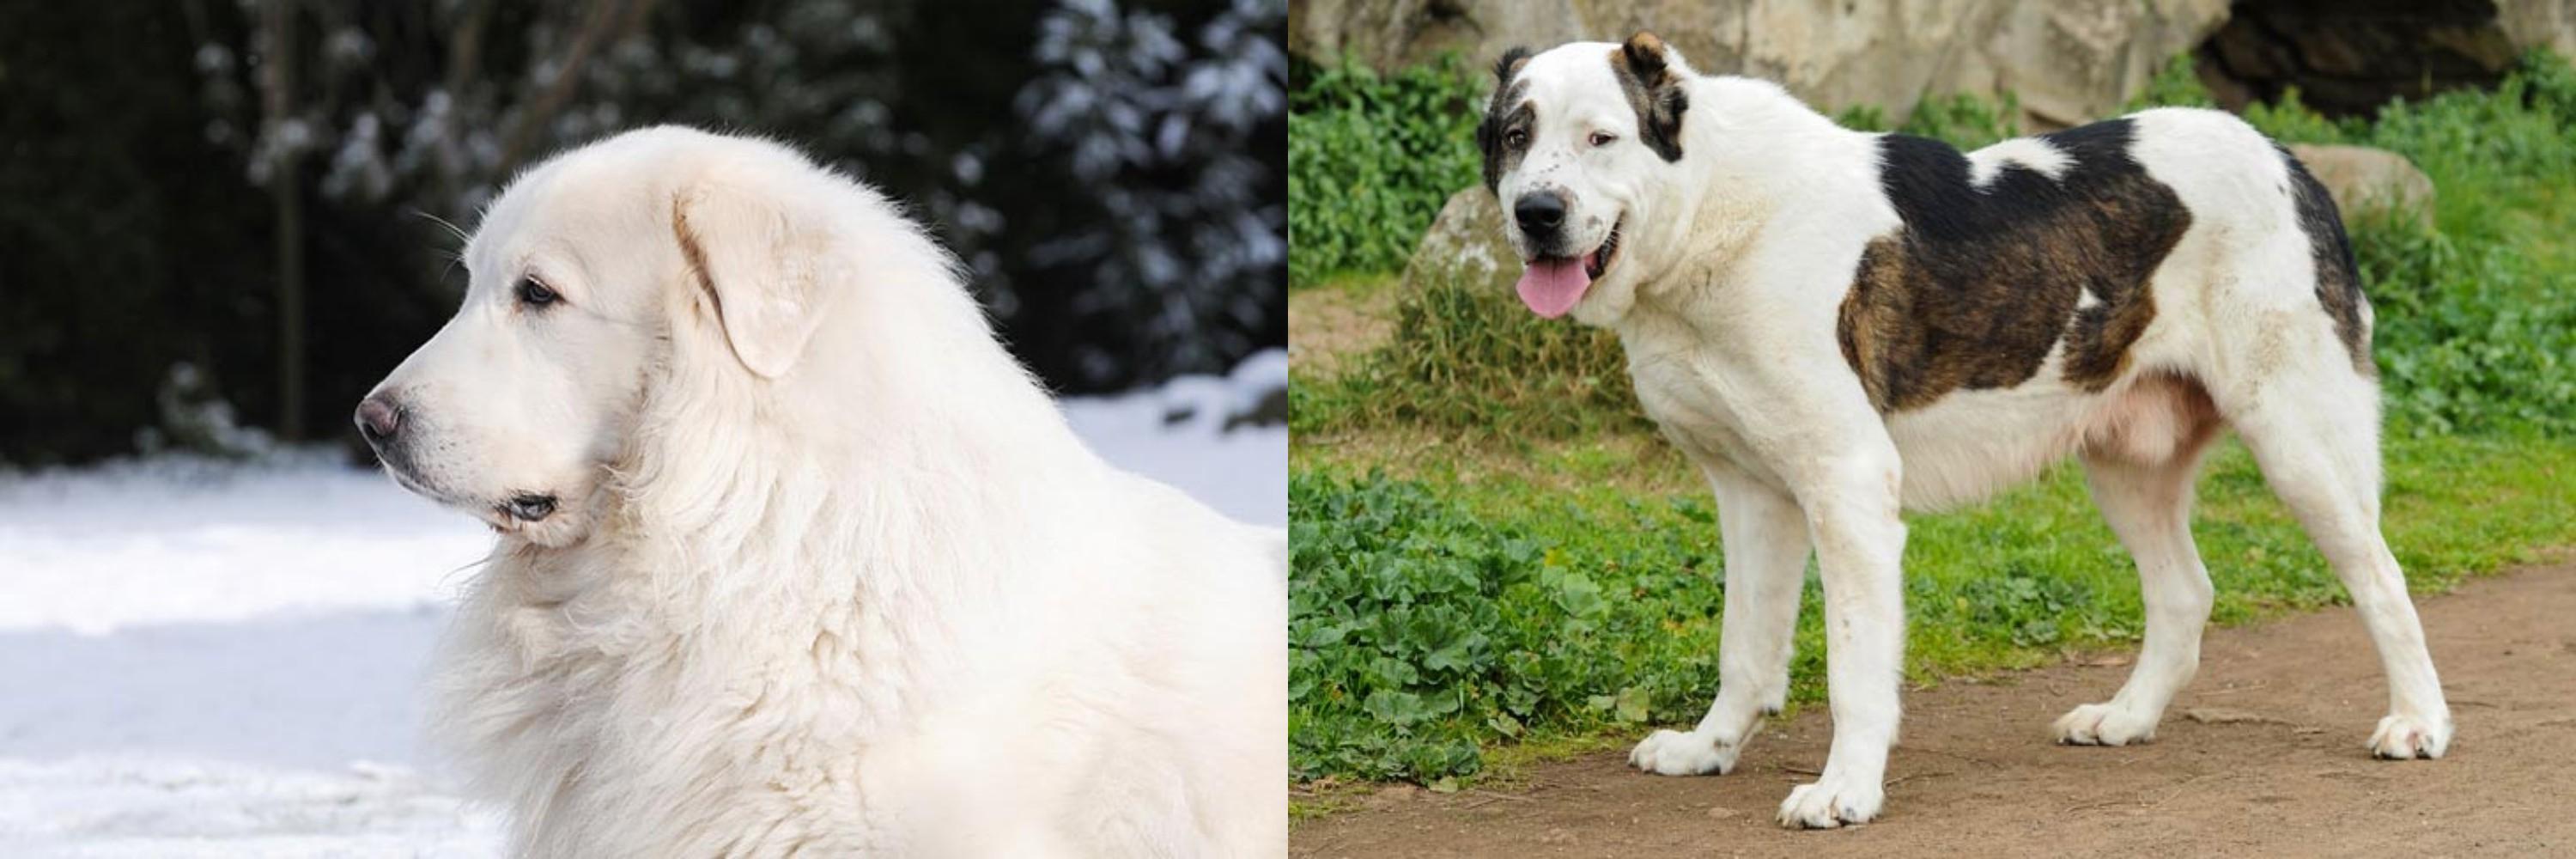 Great Pyrenees vs Central Asian Shepherd - Breed Comparison